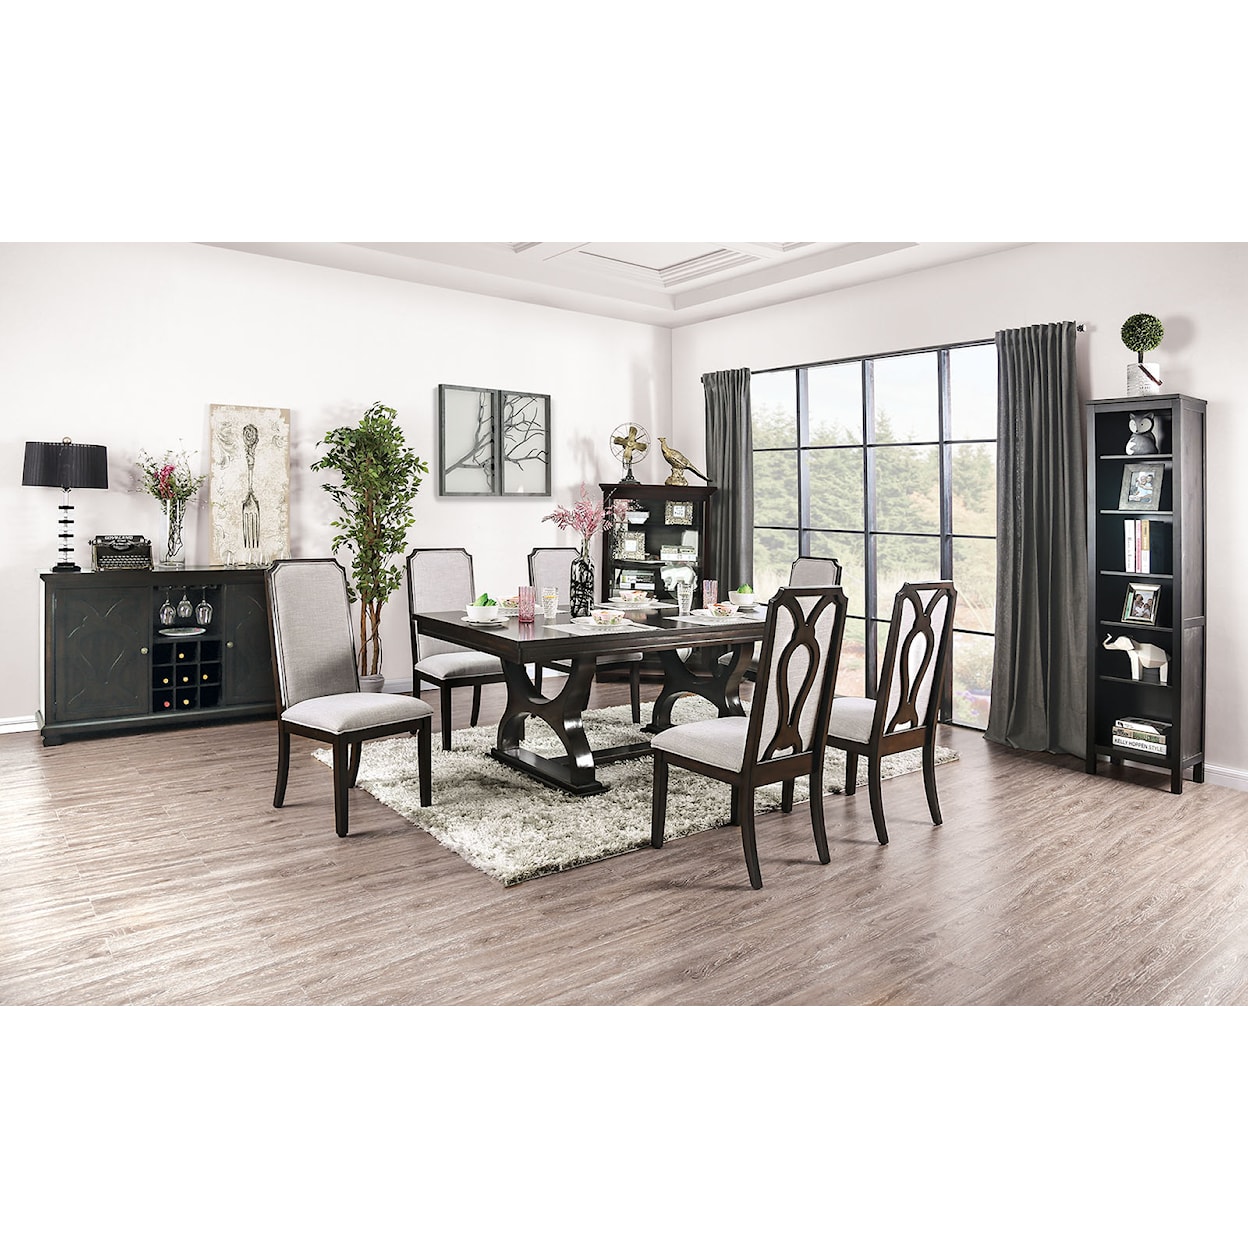 Furniture of America Gillam 7-Piece Dining Table Set